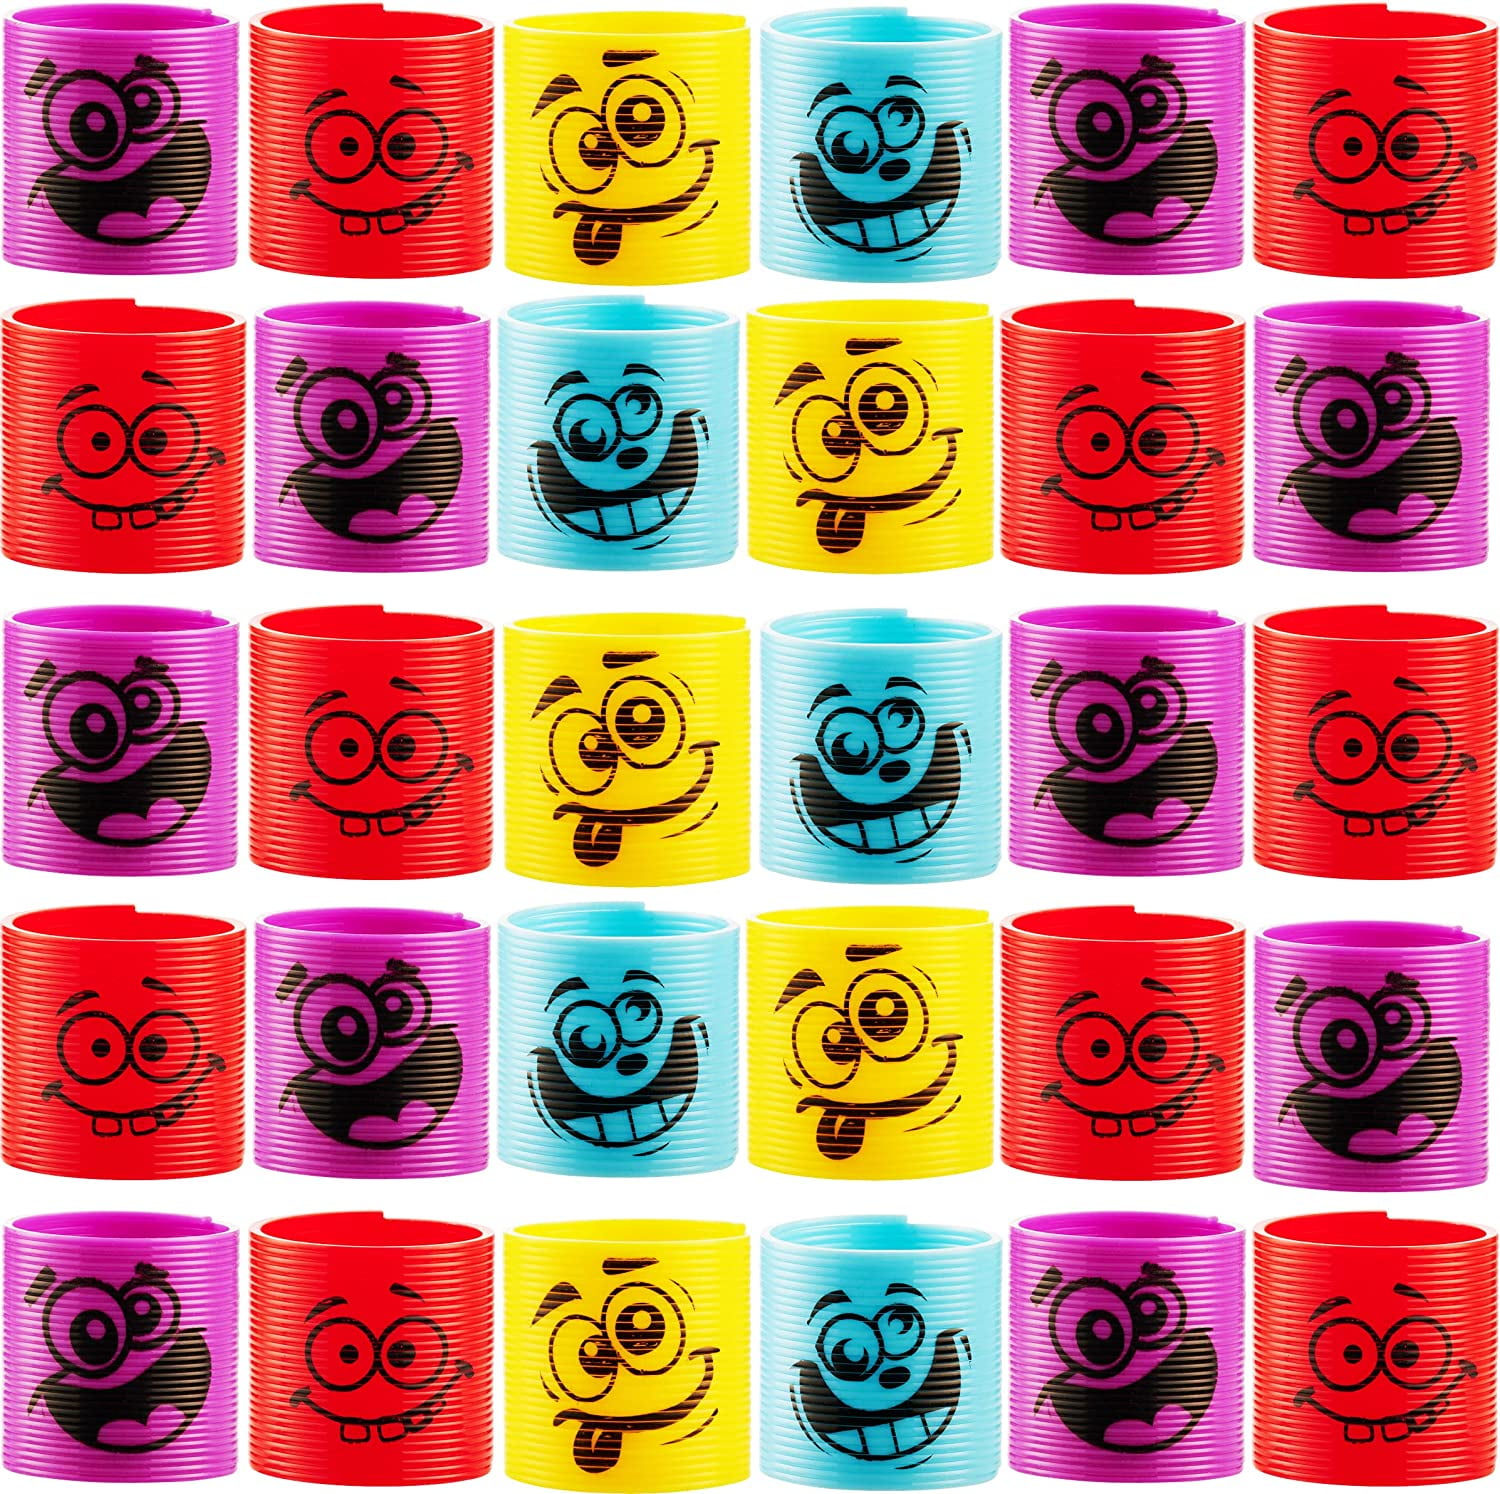 Wholesale Mega Pack of 50 Coil Springs - Assorted Emoji Silly Faces an